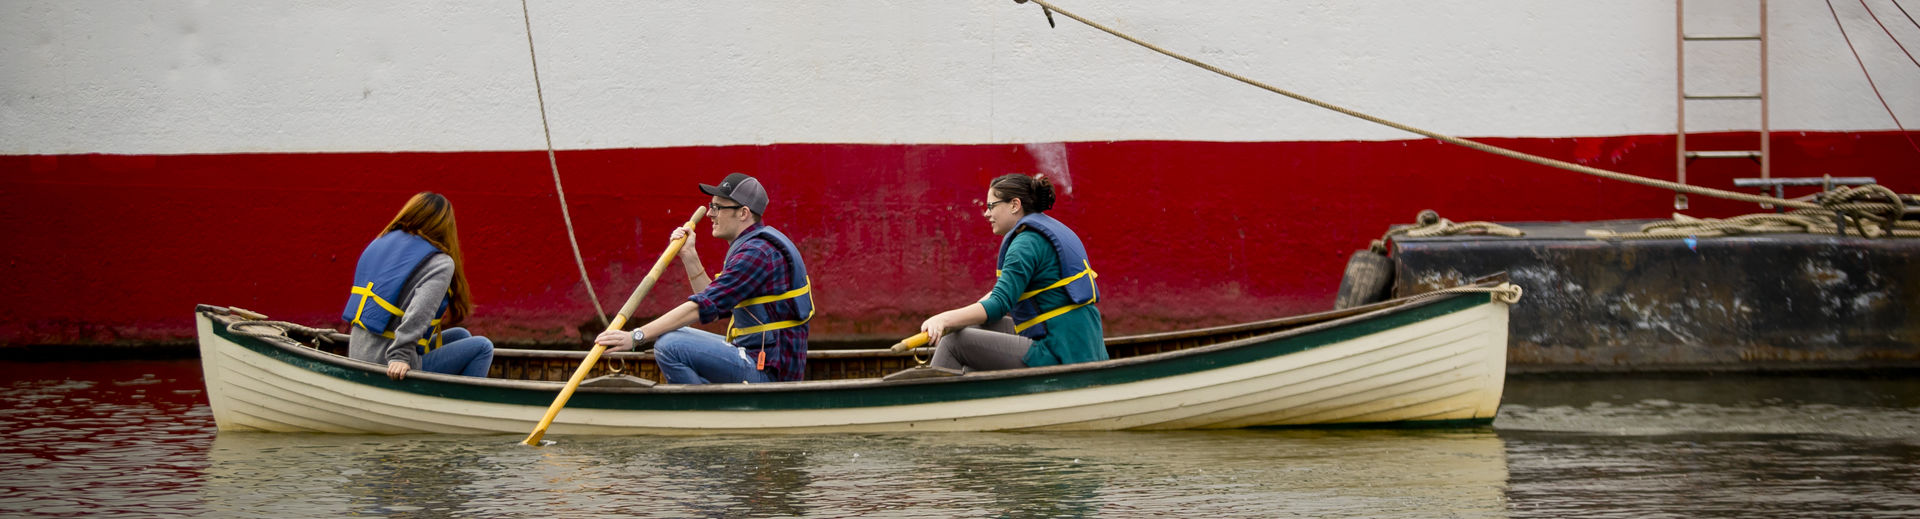 Temple graduate students in the Material Cultures class in a boat at the seaport museum